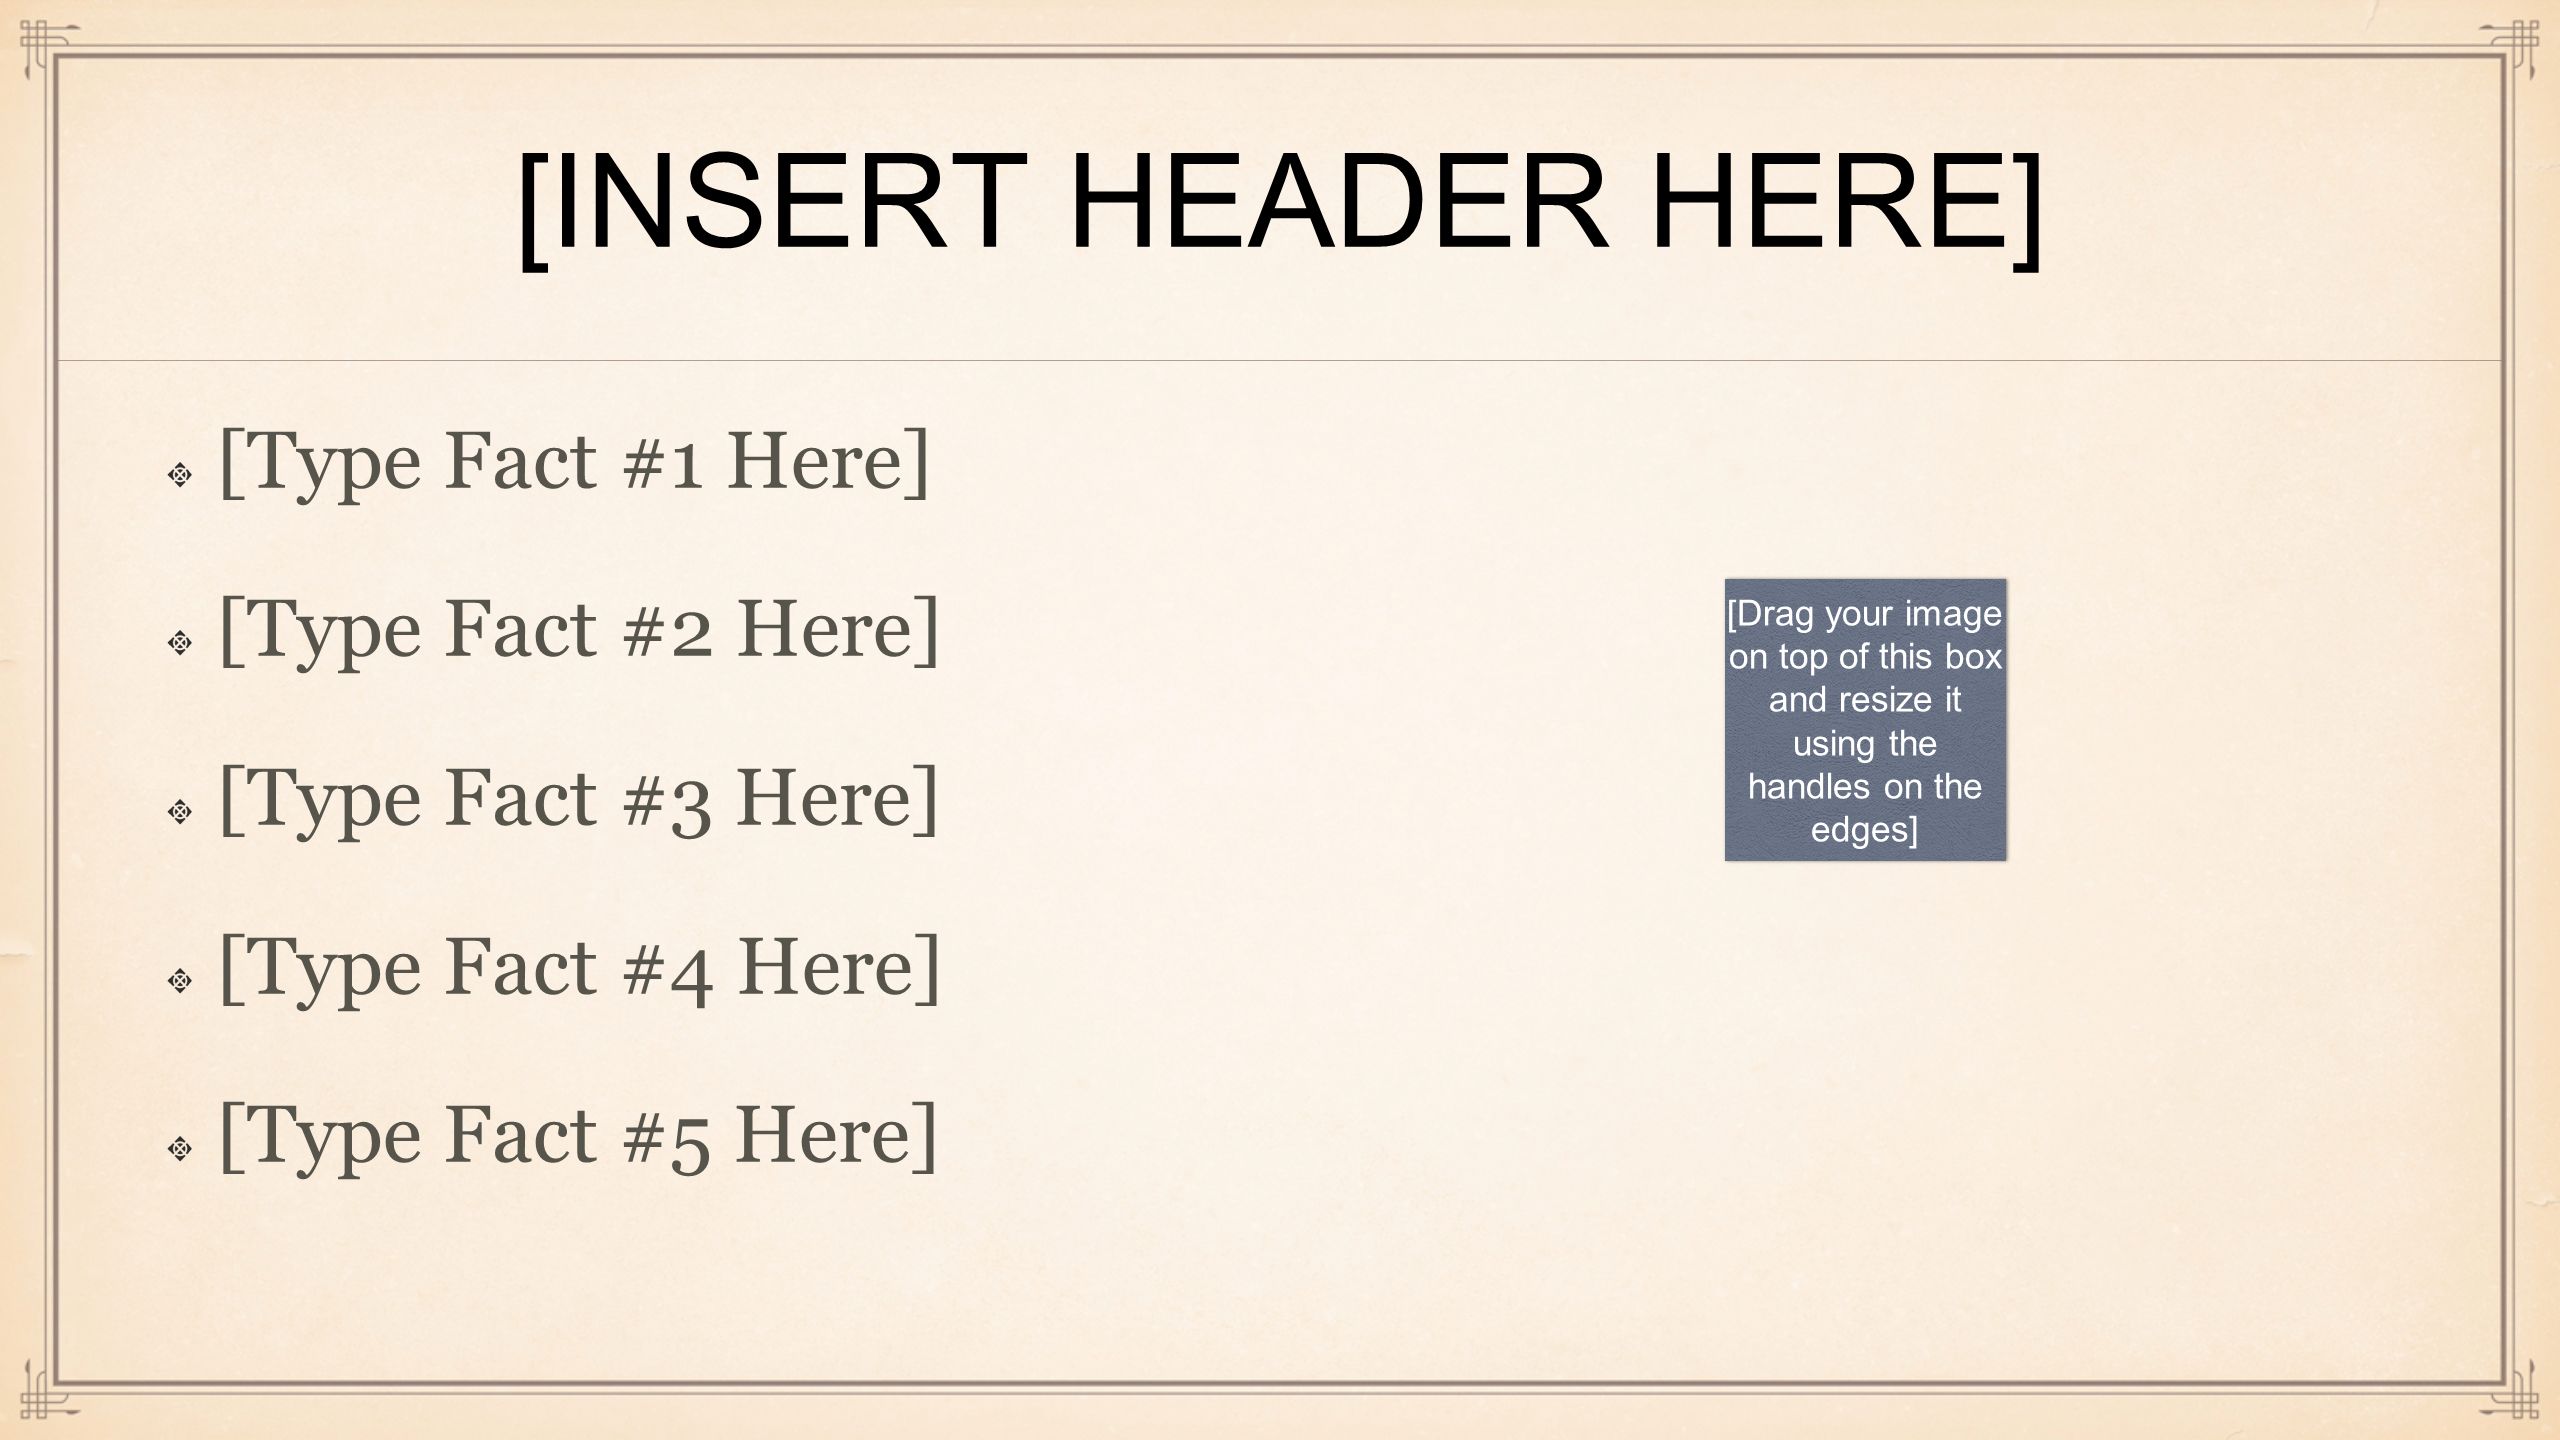 [INSERT HEADER HERE] [Type Fact #1 Here] [Type Fact #2 Here] [Type Fact #3 Here] [Type Fact #4 Here] [Type Fact #5 Here] [Drag your image on top of this box and resize it using the handles on the edges]